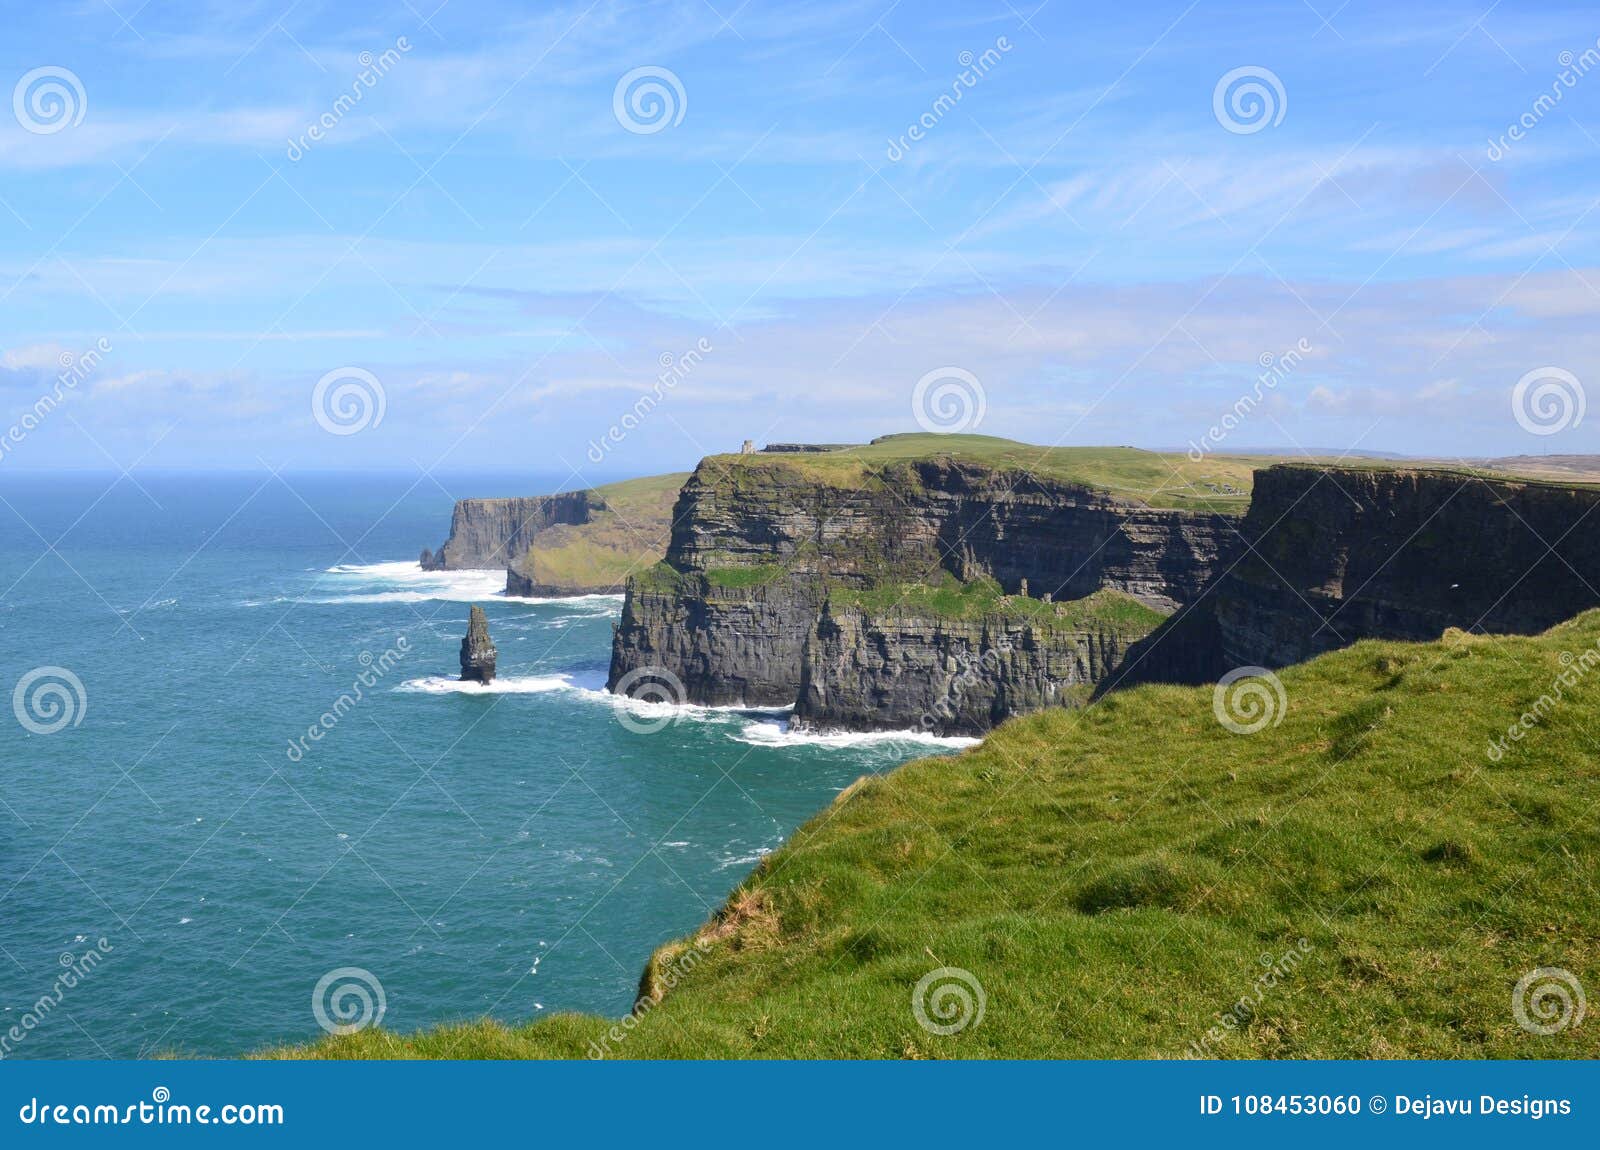 stunning photo of the grassy tops of the cliffs of moher